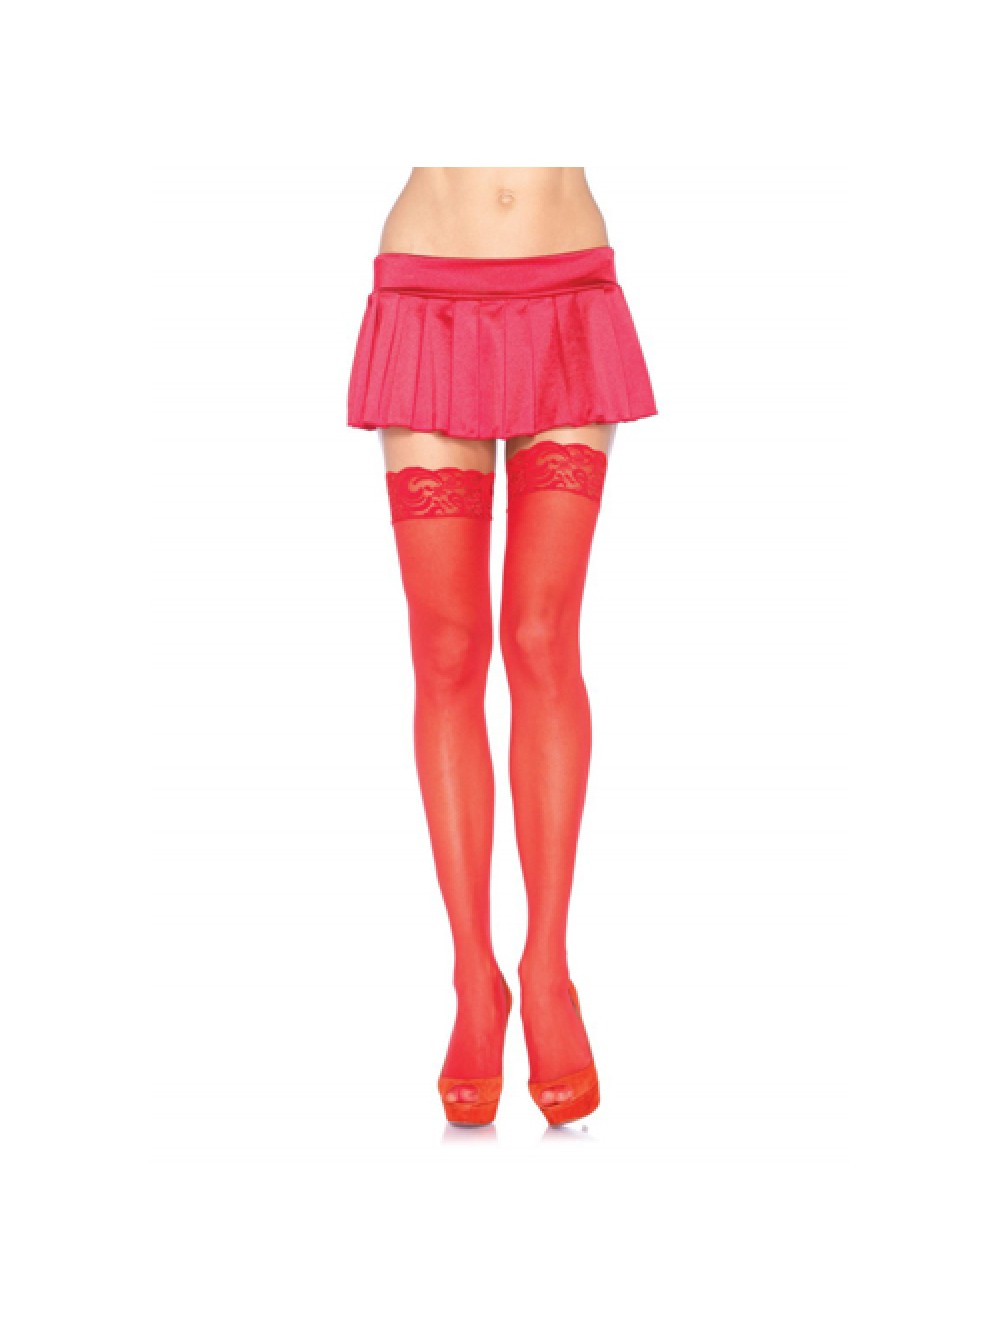 Nylon Thigh Highs With Lace Top - Red